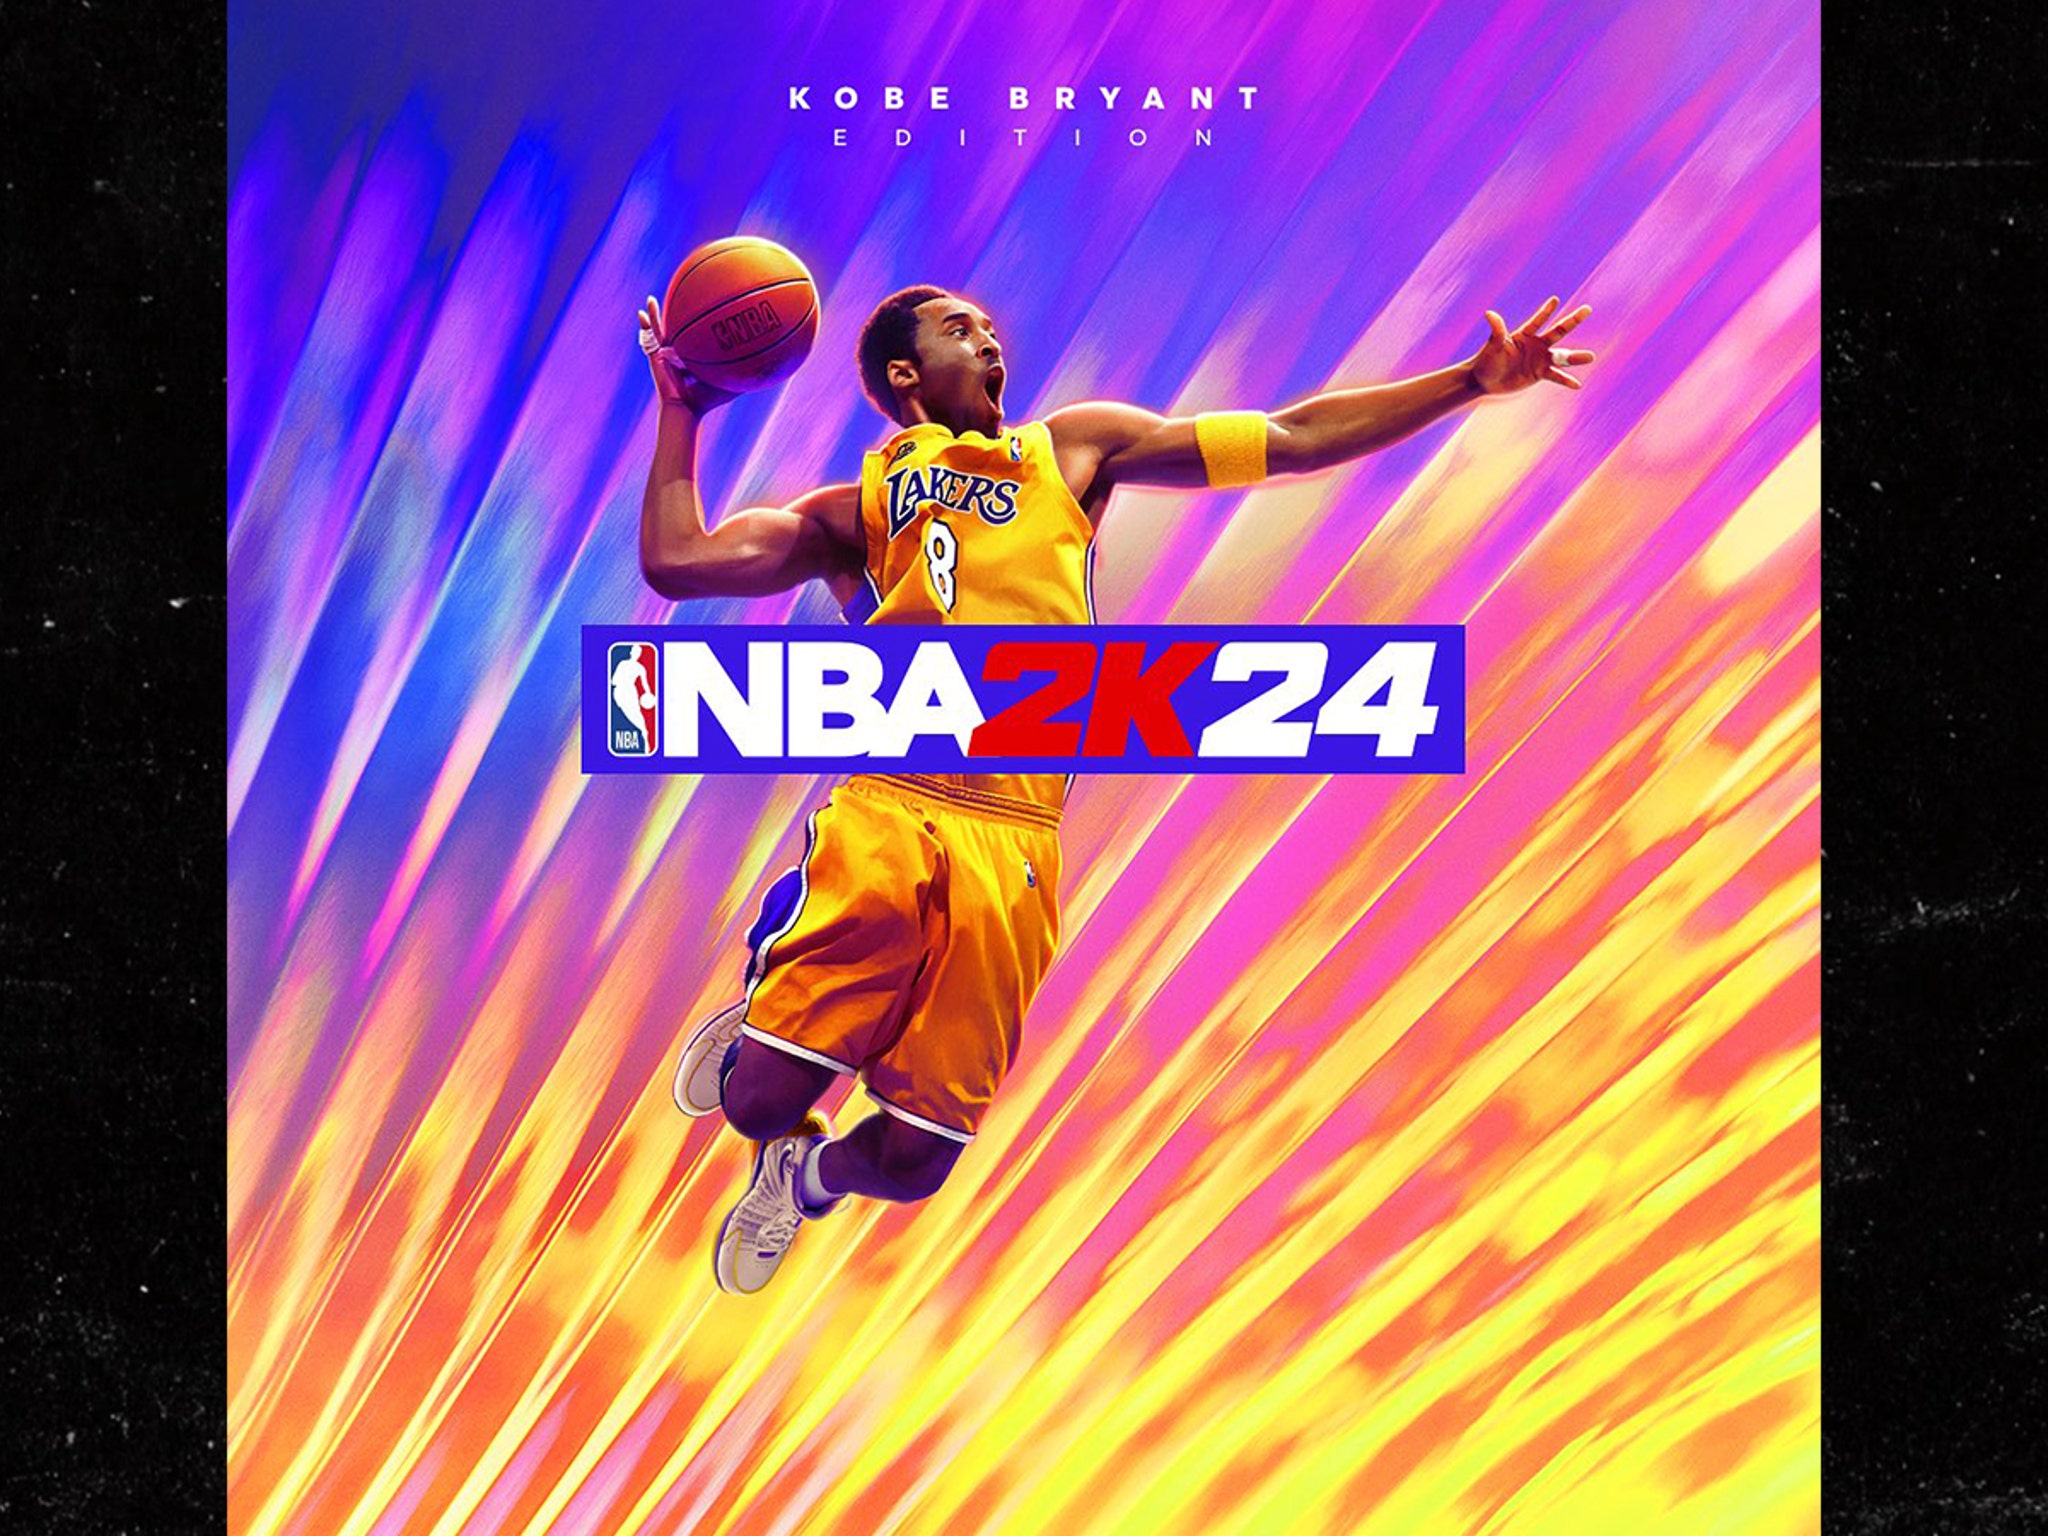 2k24 Mamba Mentality: “Complete the 'minimizer' quest at the Art